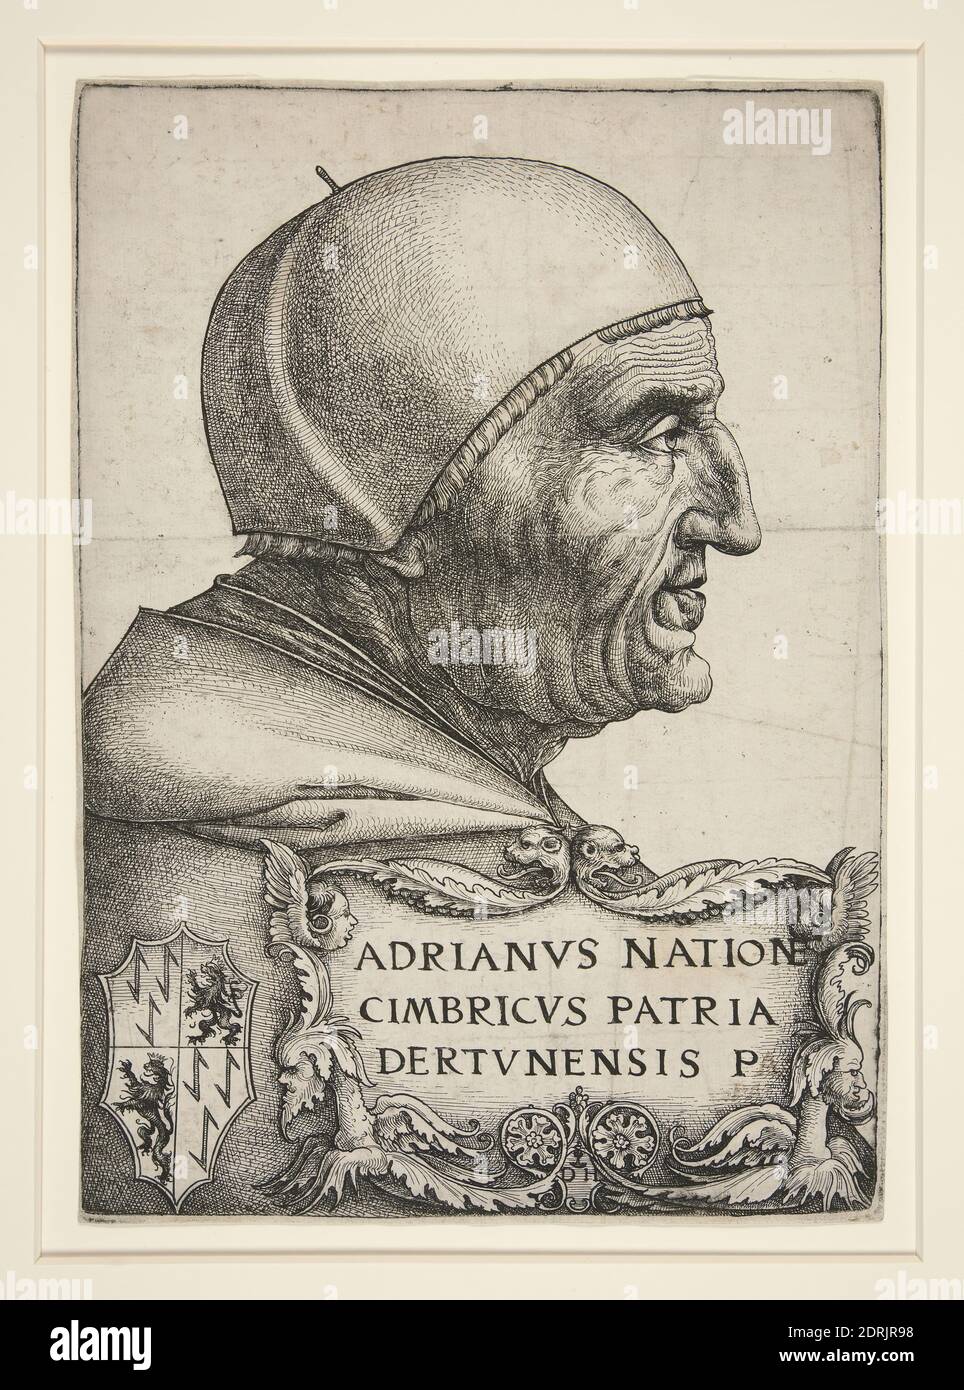 Artist: Daniel Hopfer the Elder, German, 1470–1536, Portrait of Adrien VI (Hadrian VI, Pope 1522-1523), late-15th to mid-16th century, Etching, sheet: 22.5 × 15.8 cm (8 7/8 × 6 1/4 in.), Made in Germany, German, 15th century, Works on Paper - Prints Stock Photo